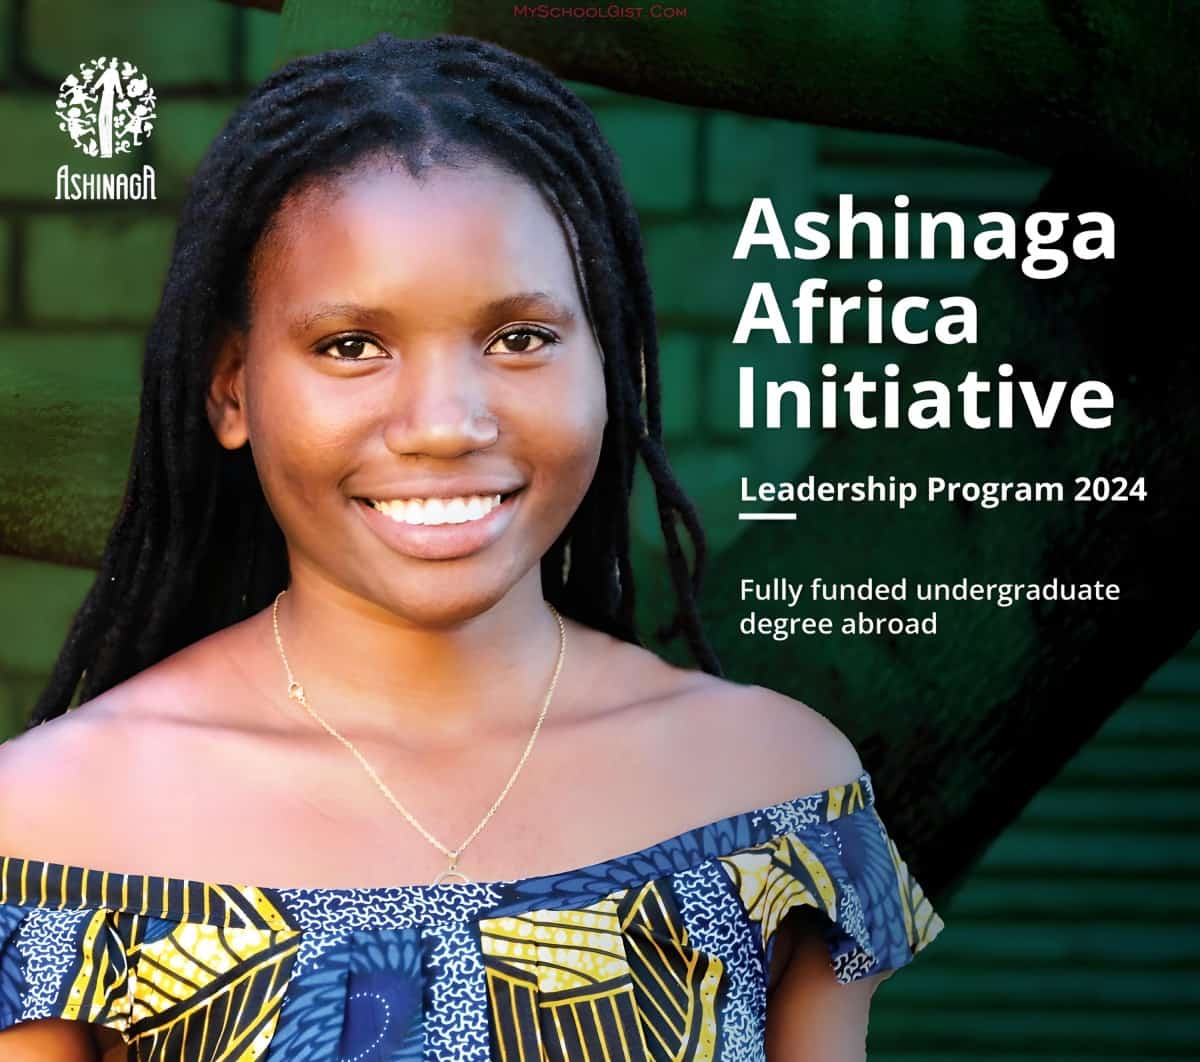 Ashinaga Africa Initiative for Young African Leaders